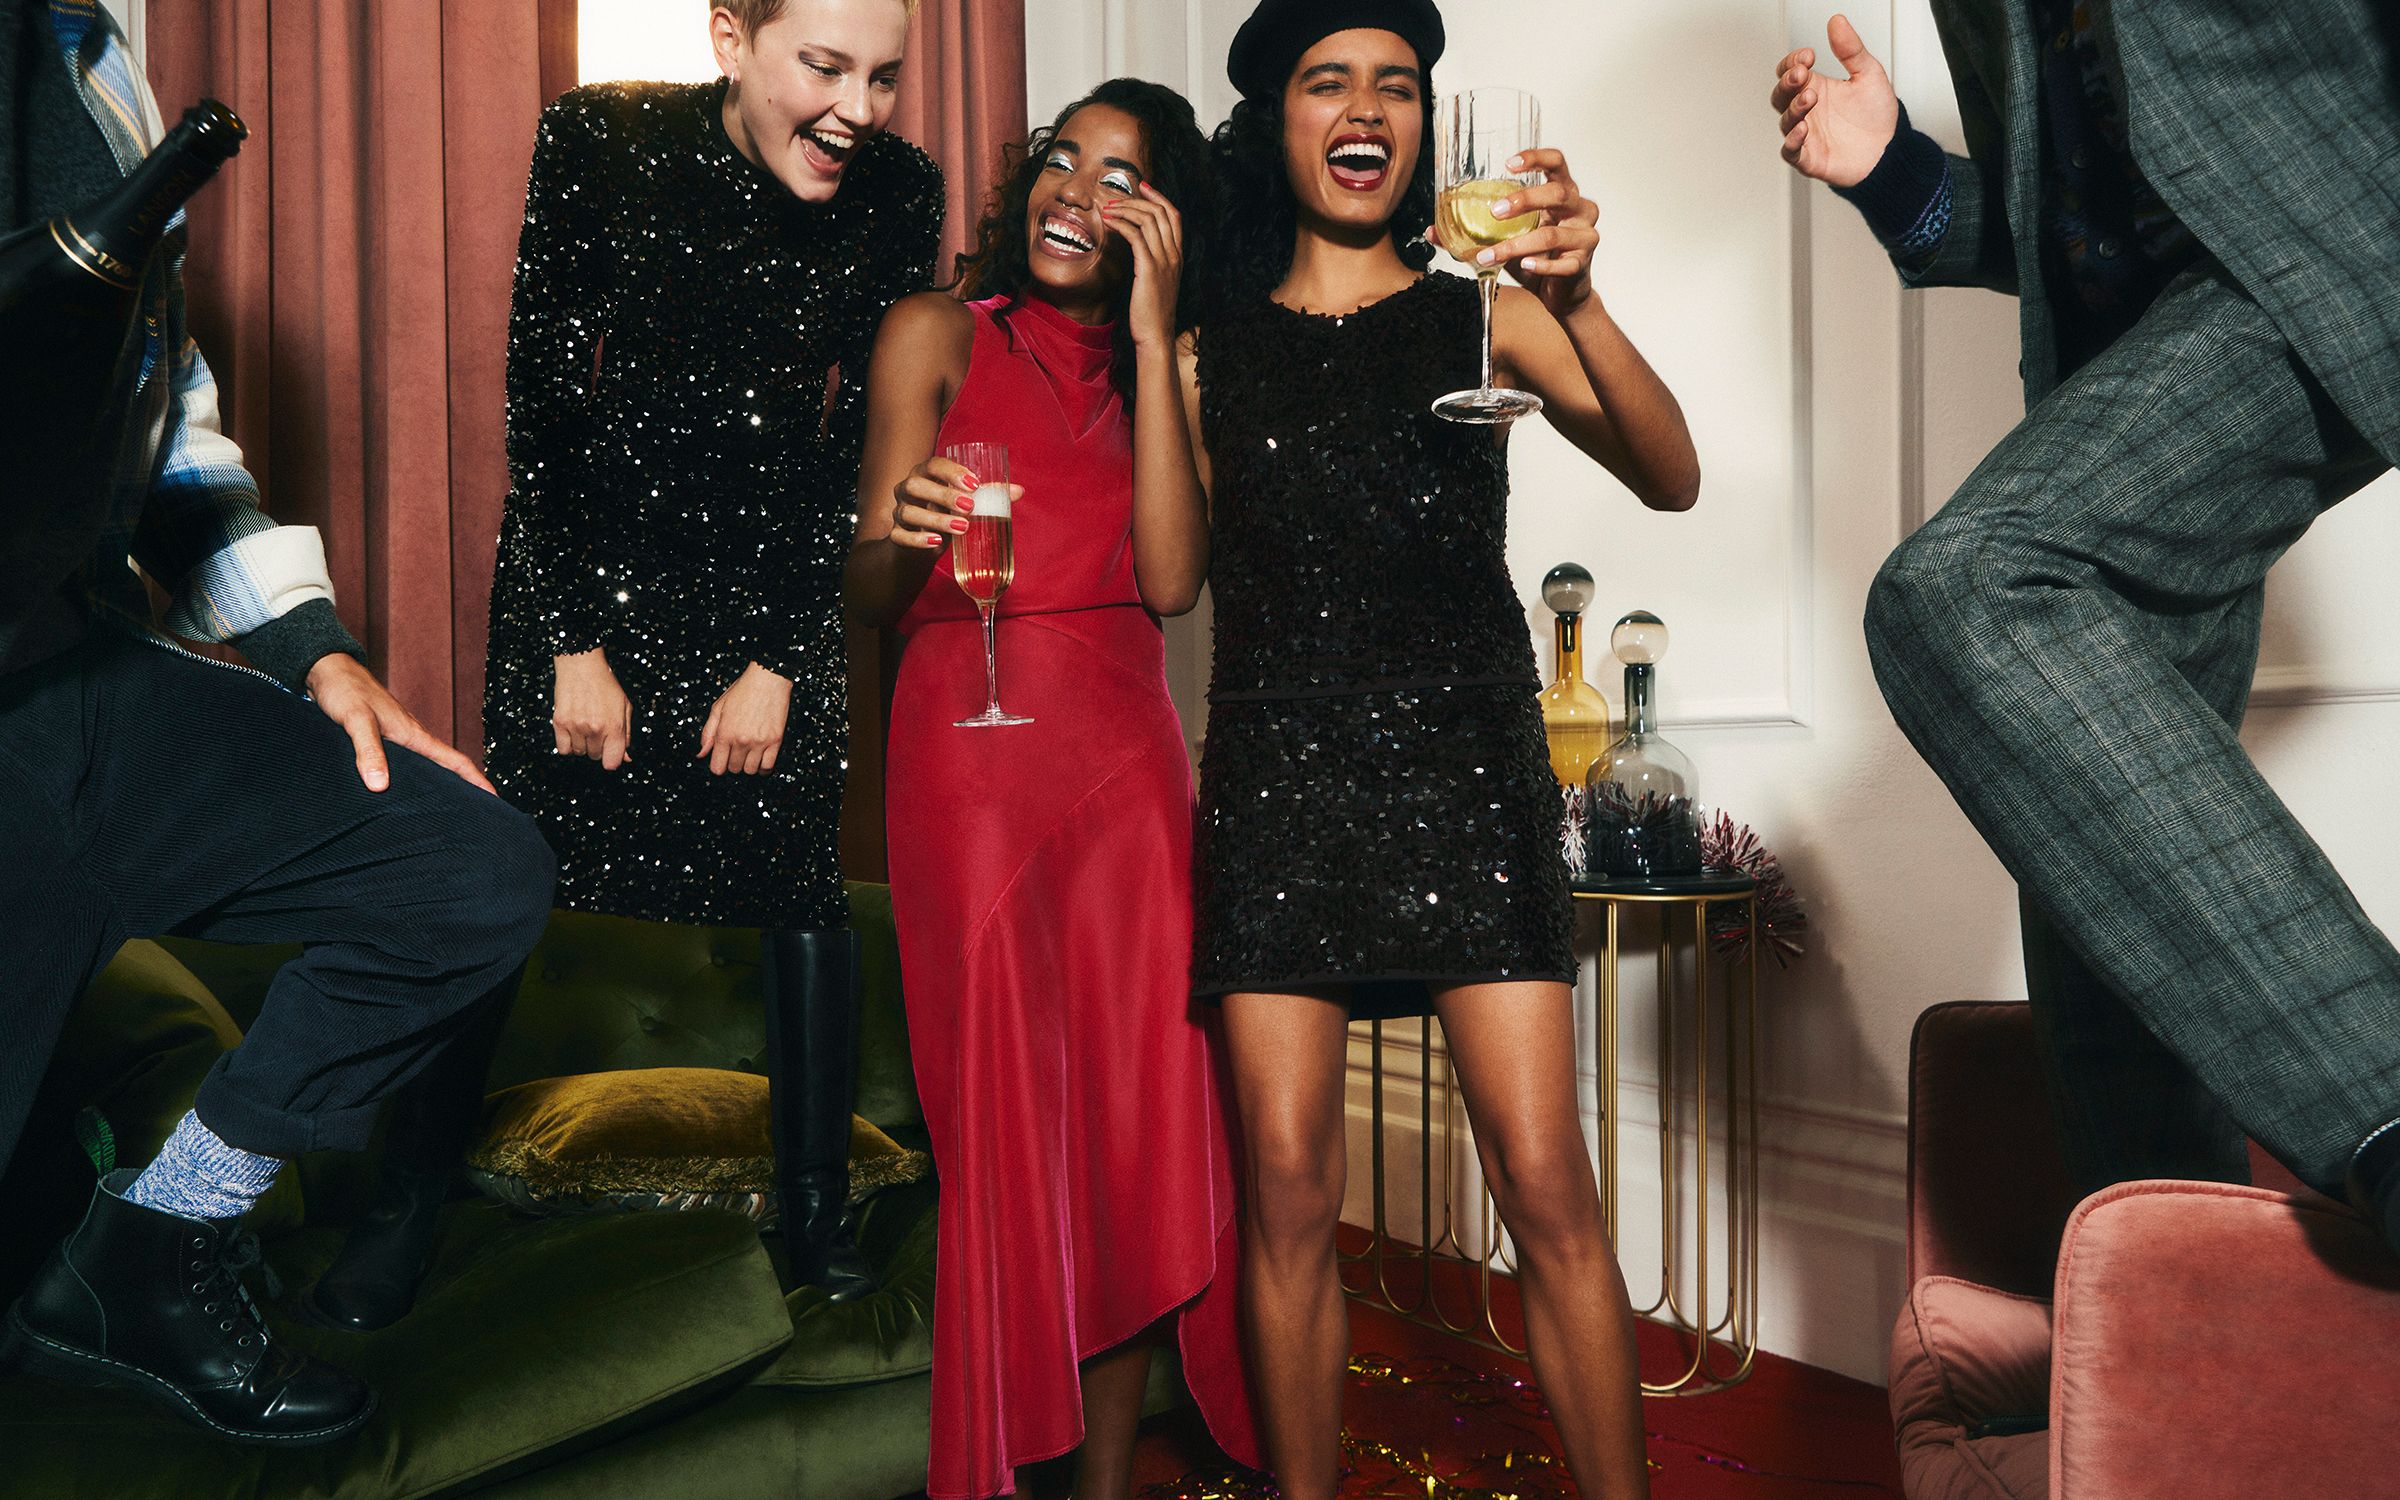 Holiday Party Lookbook  10 Sophisticated Festive Looks for